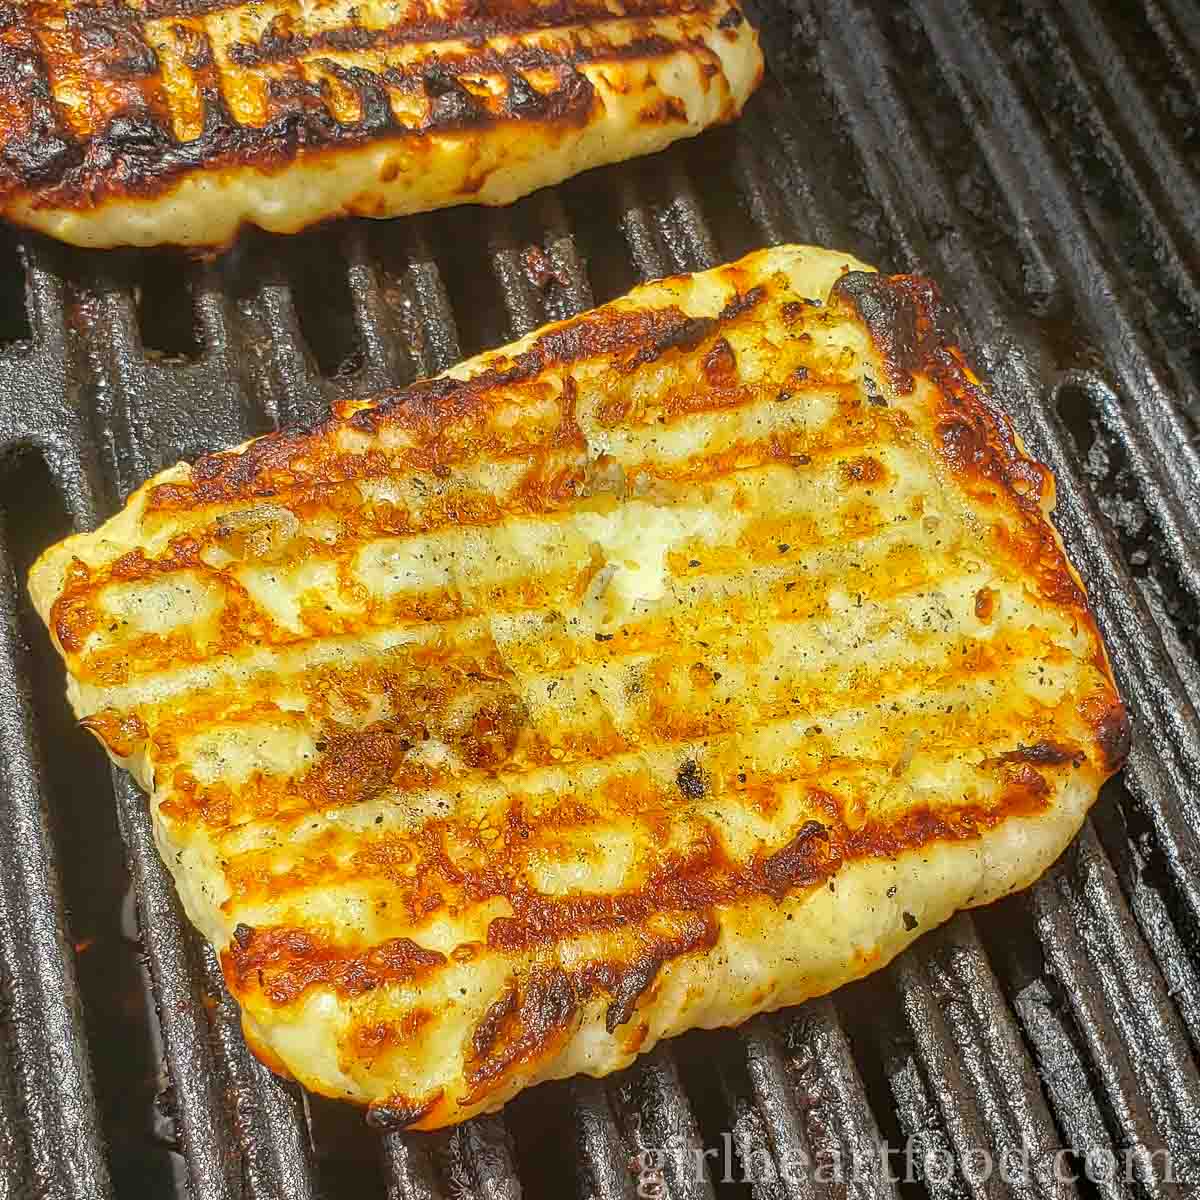 Grilled halloumi cheese on a grill.